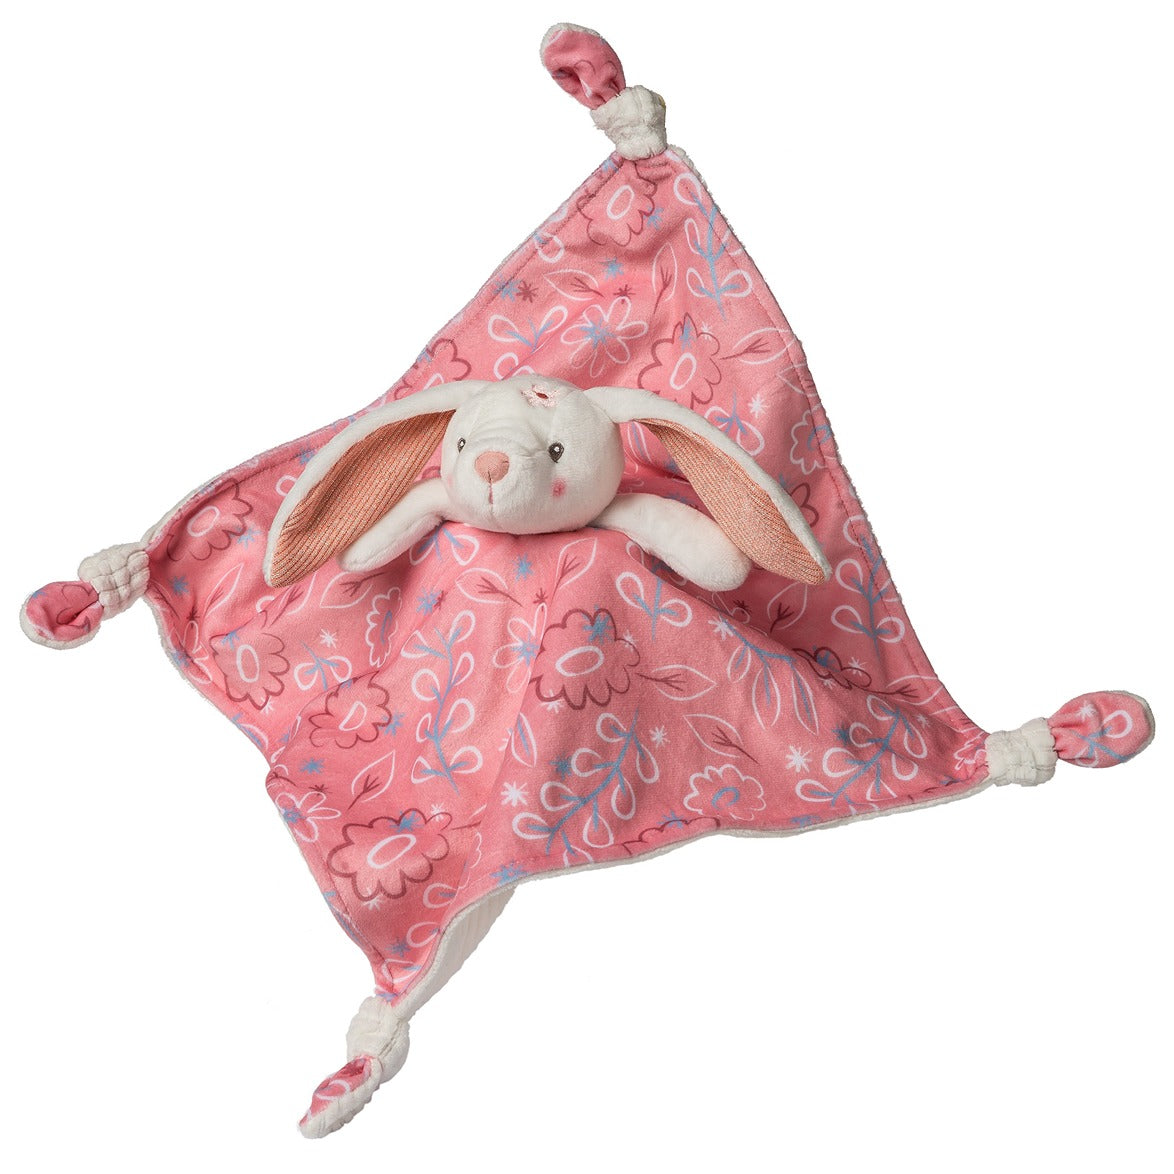 Pink bunny knotted comforted with leaf and flower patterns